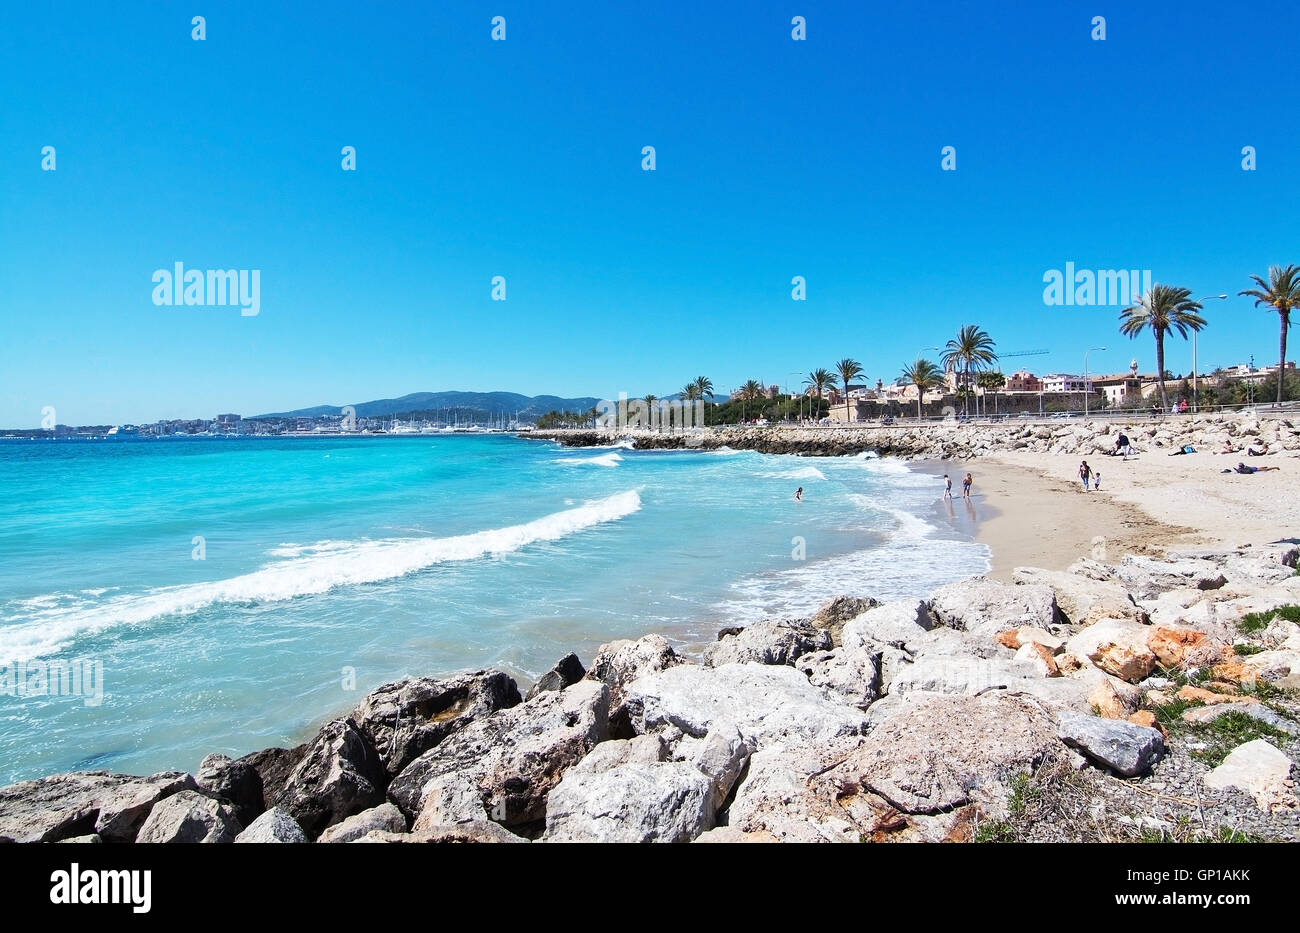 Palma beach next to bicycle route on April 10, 2016 in Palma de Mallorca, Balearic islands, Spain. Stock Photo